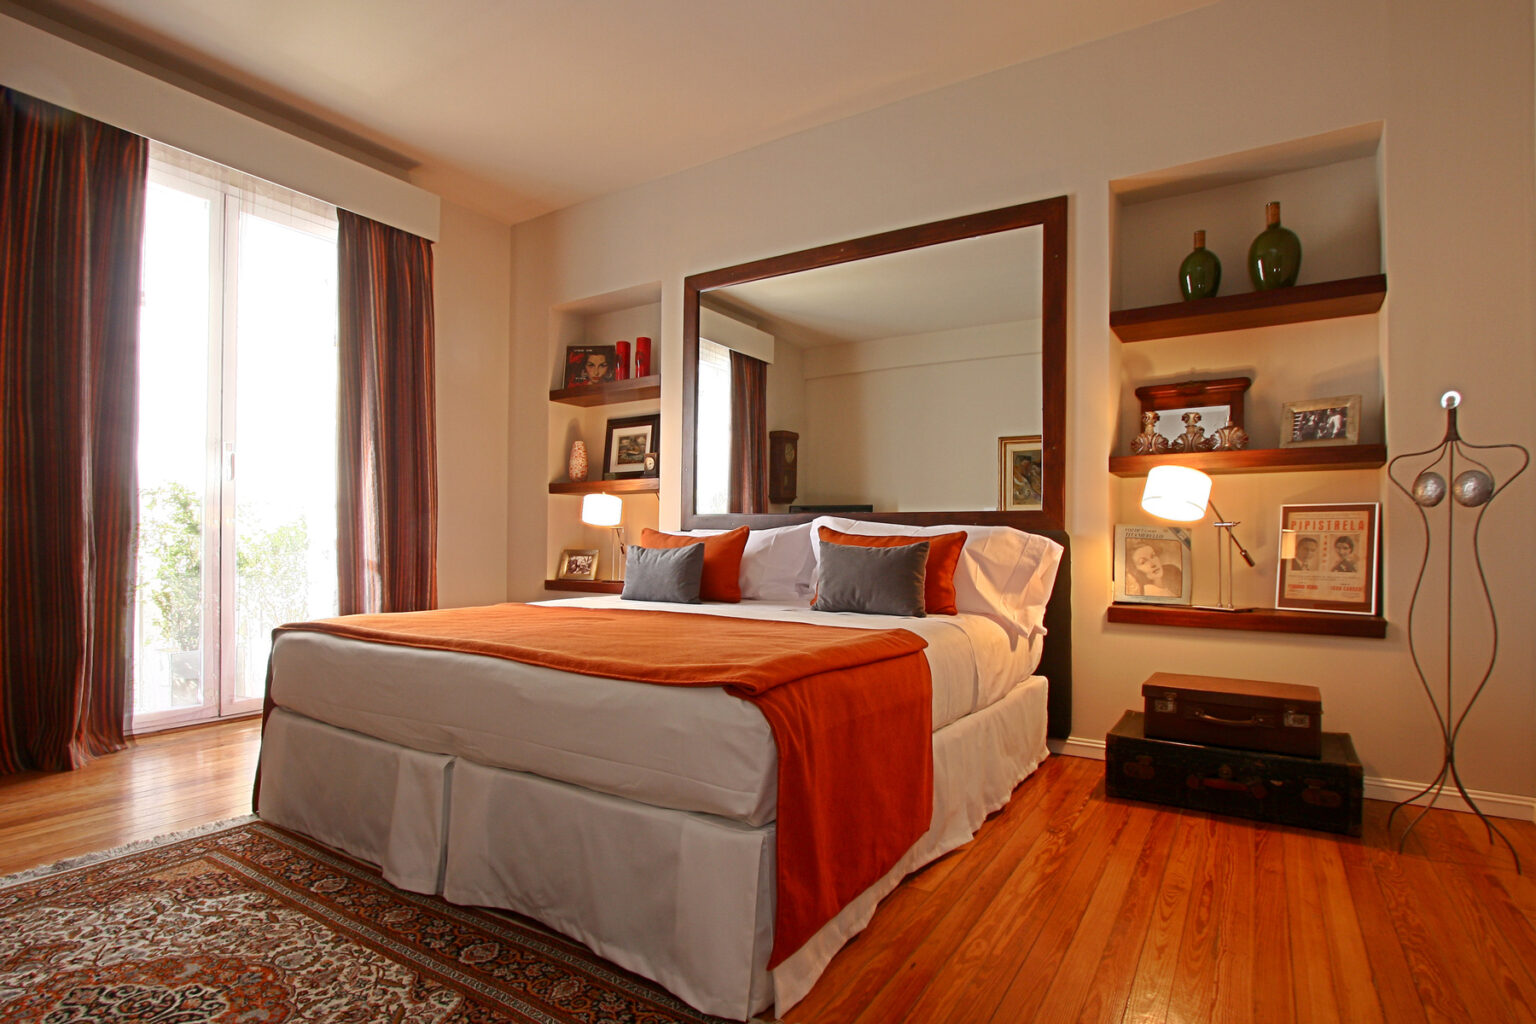 Hotel room with hardwood floors, large bed, and mirror